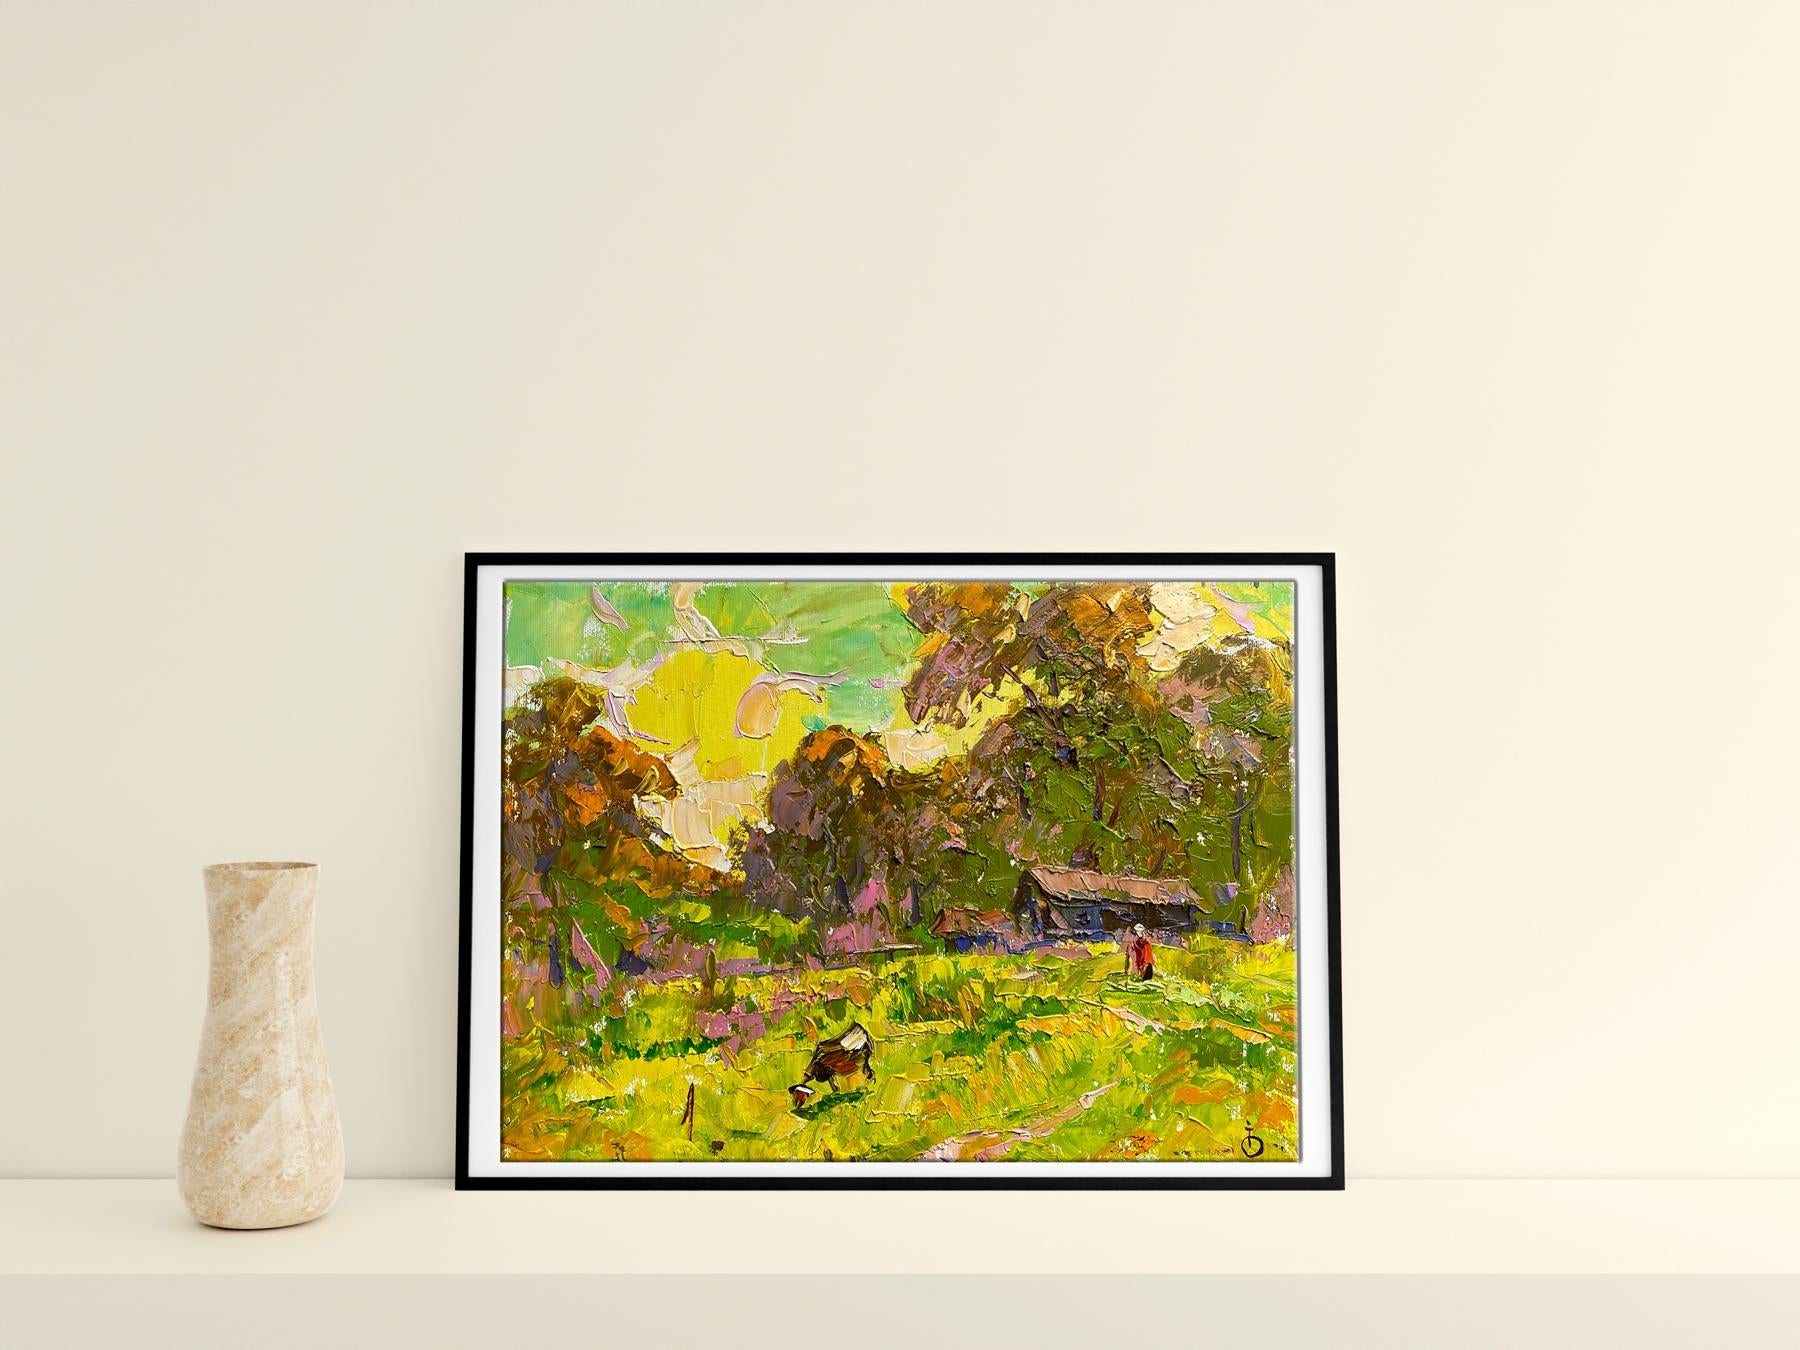 Tranquil pastoral scene in "On the Pasture" oil painting by Alex Ivanyuk.